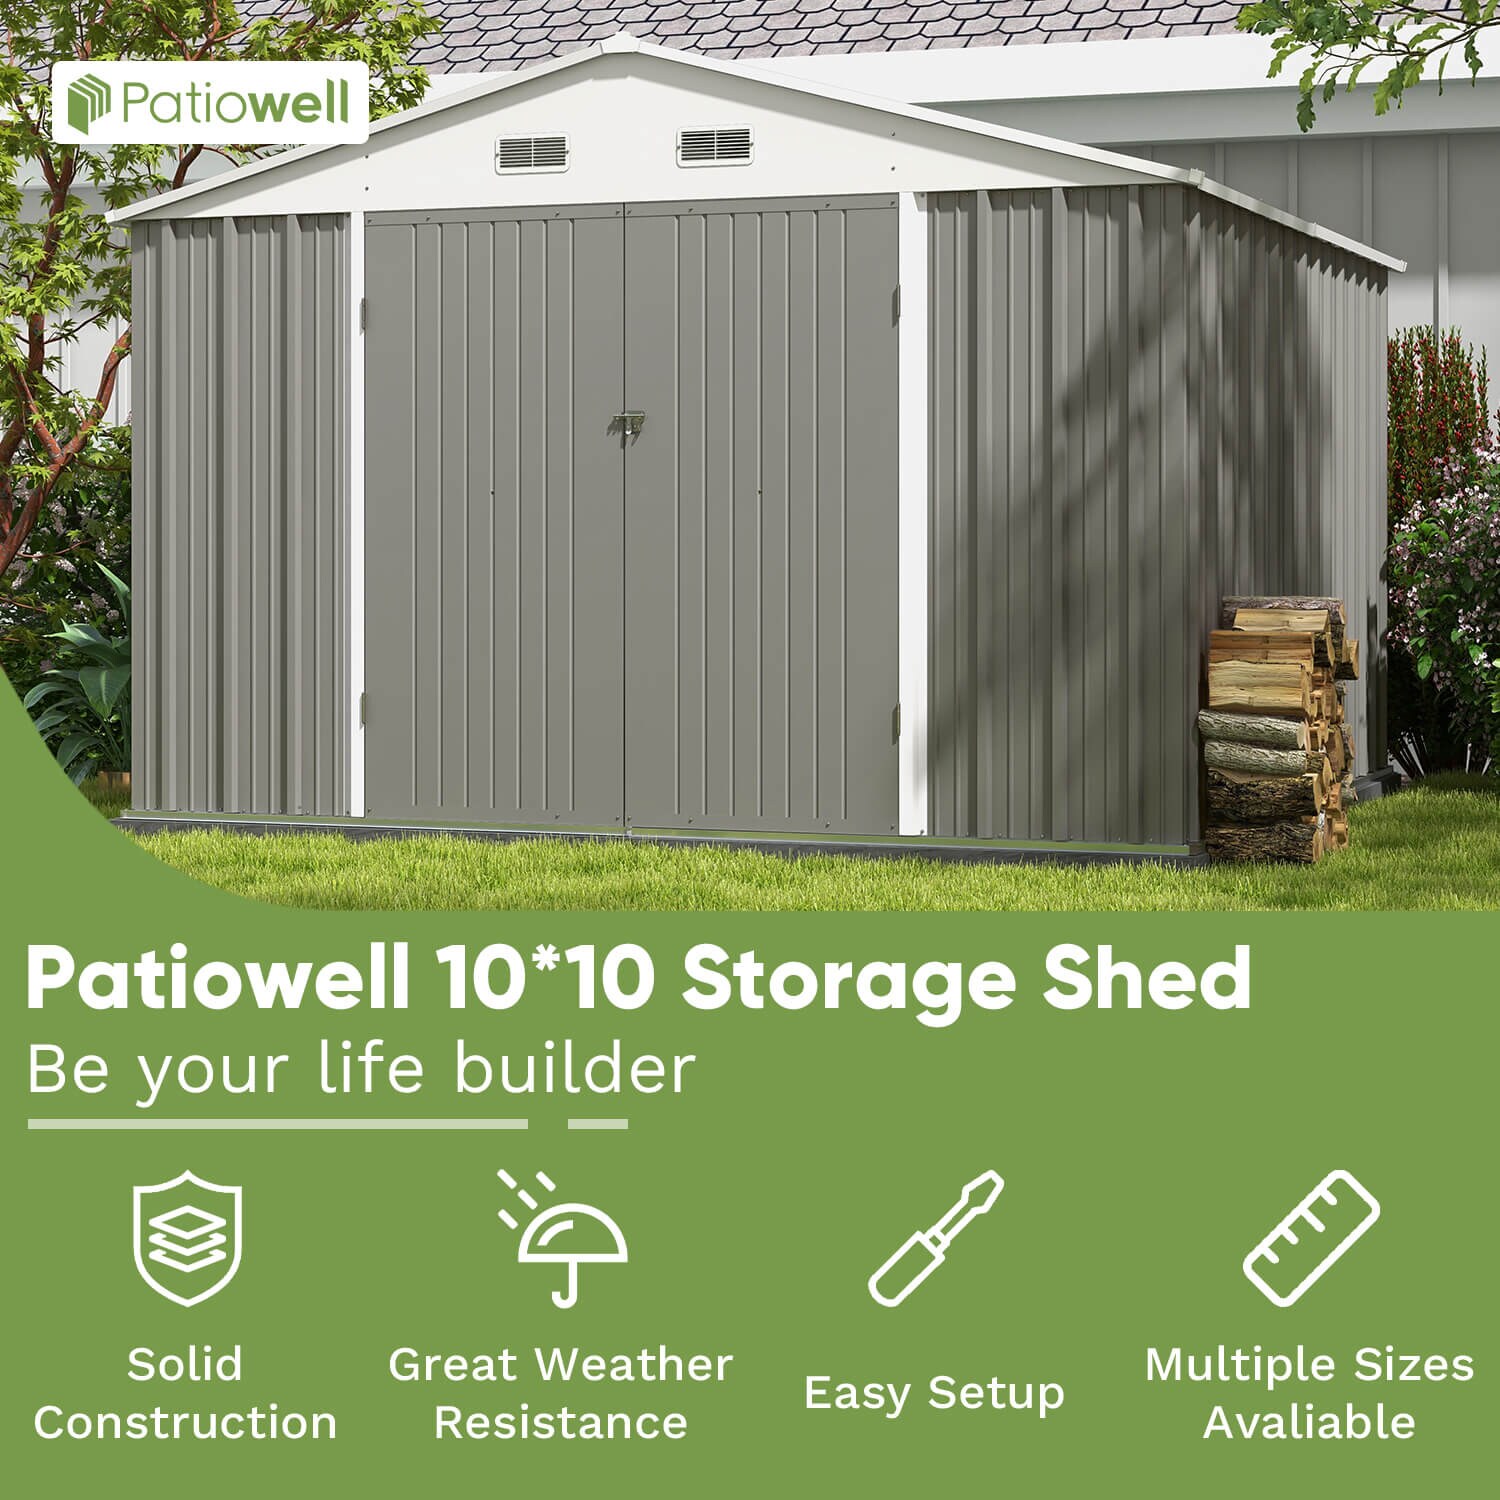 2.8 ft. W x 1.5 ft. D Wood Gray Garden Shed 3-Tier Patio Storage Cabinet Outdoor Organizer 4.2 sq. ft.